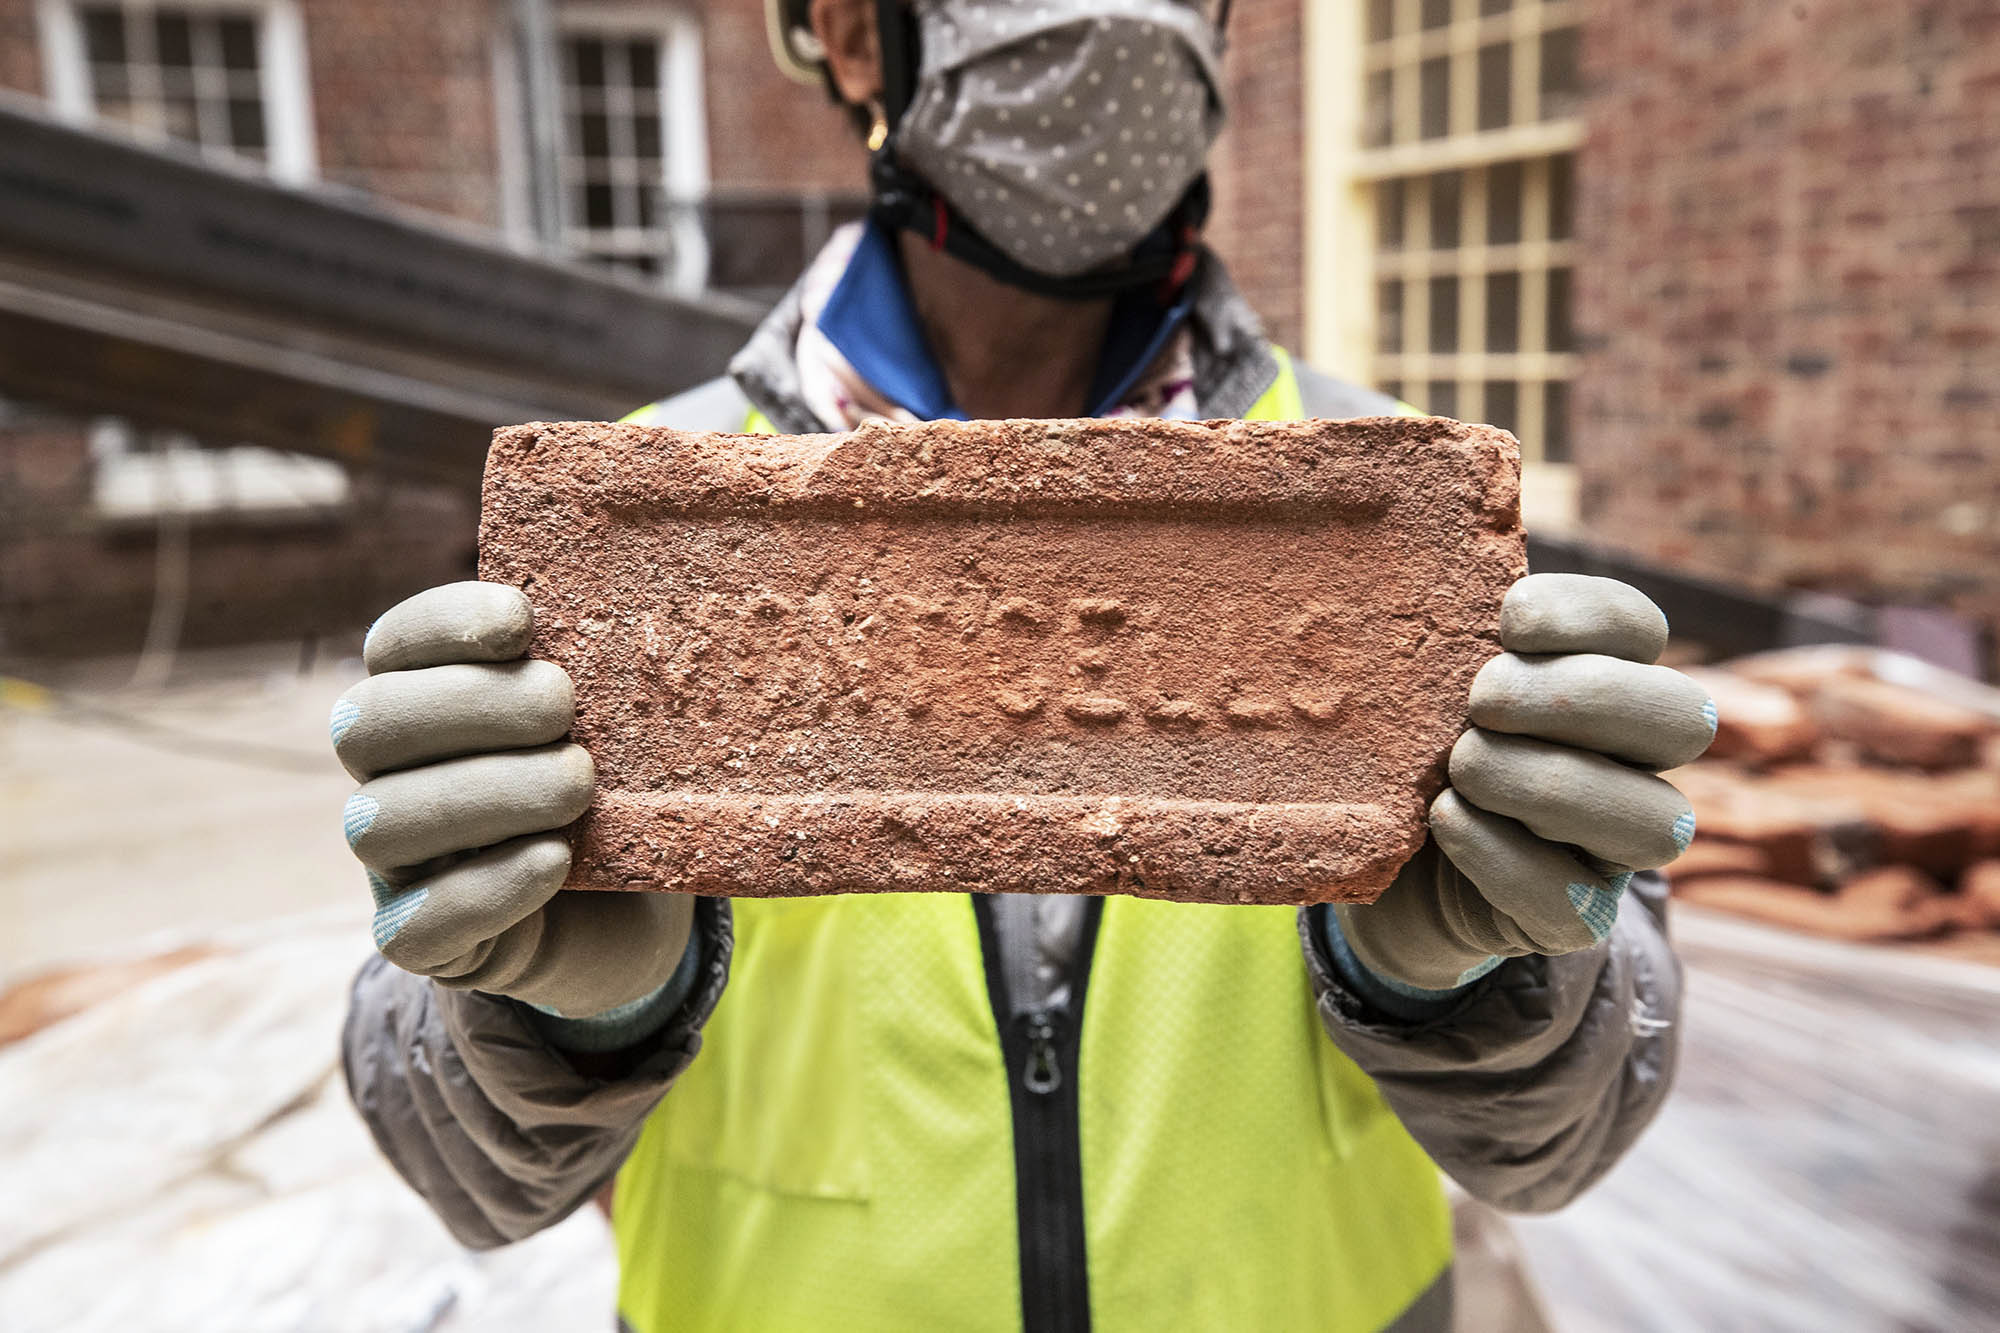  Kit Meyer holds a Monticello brick